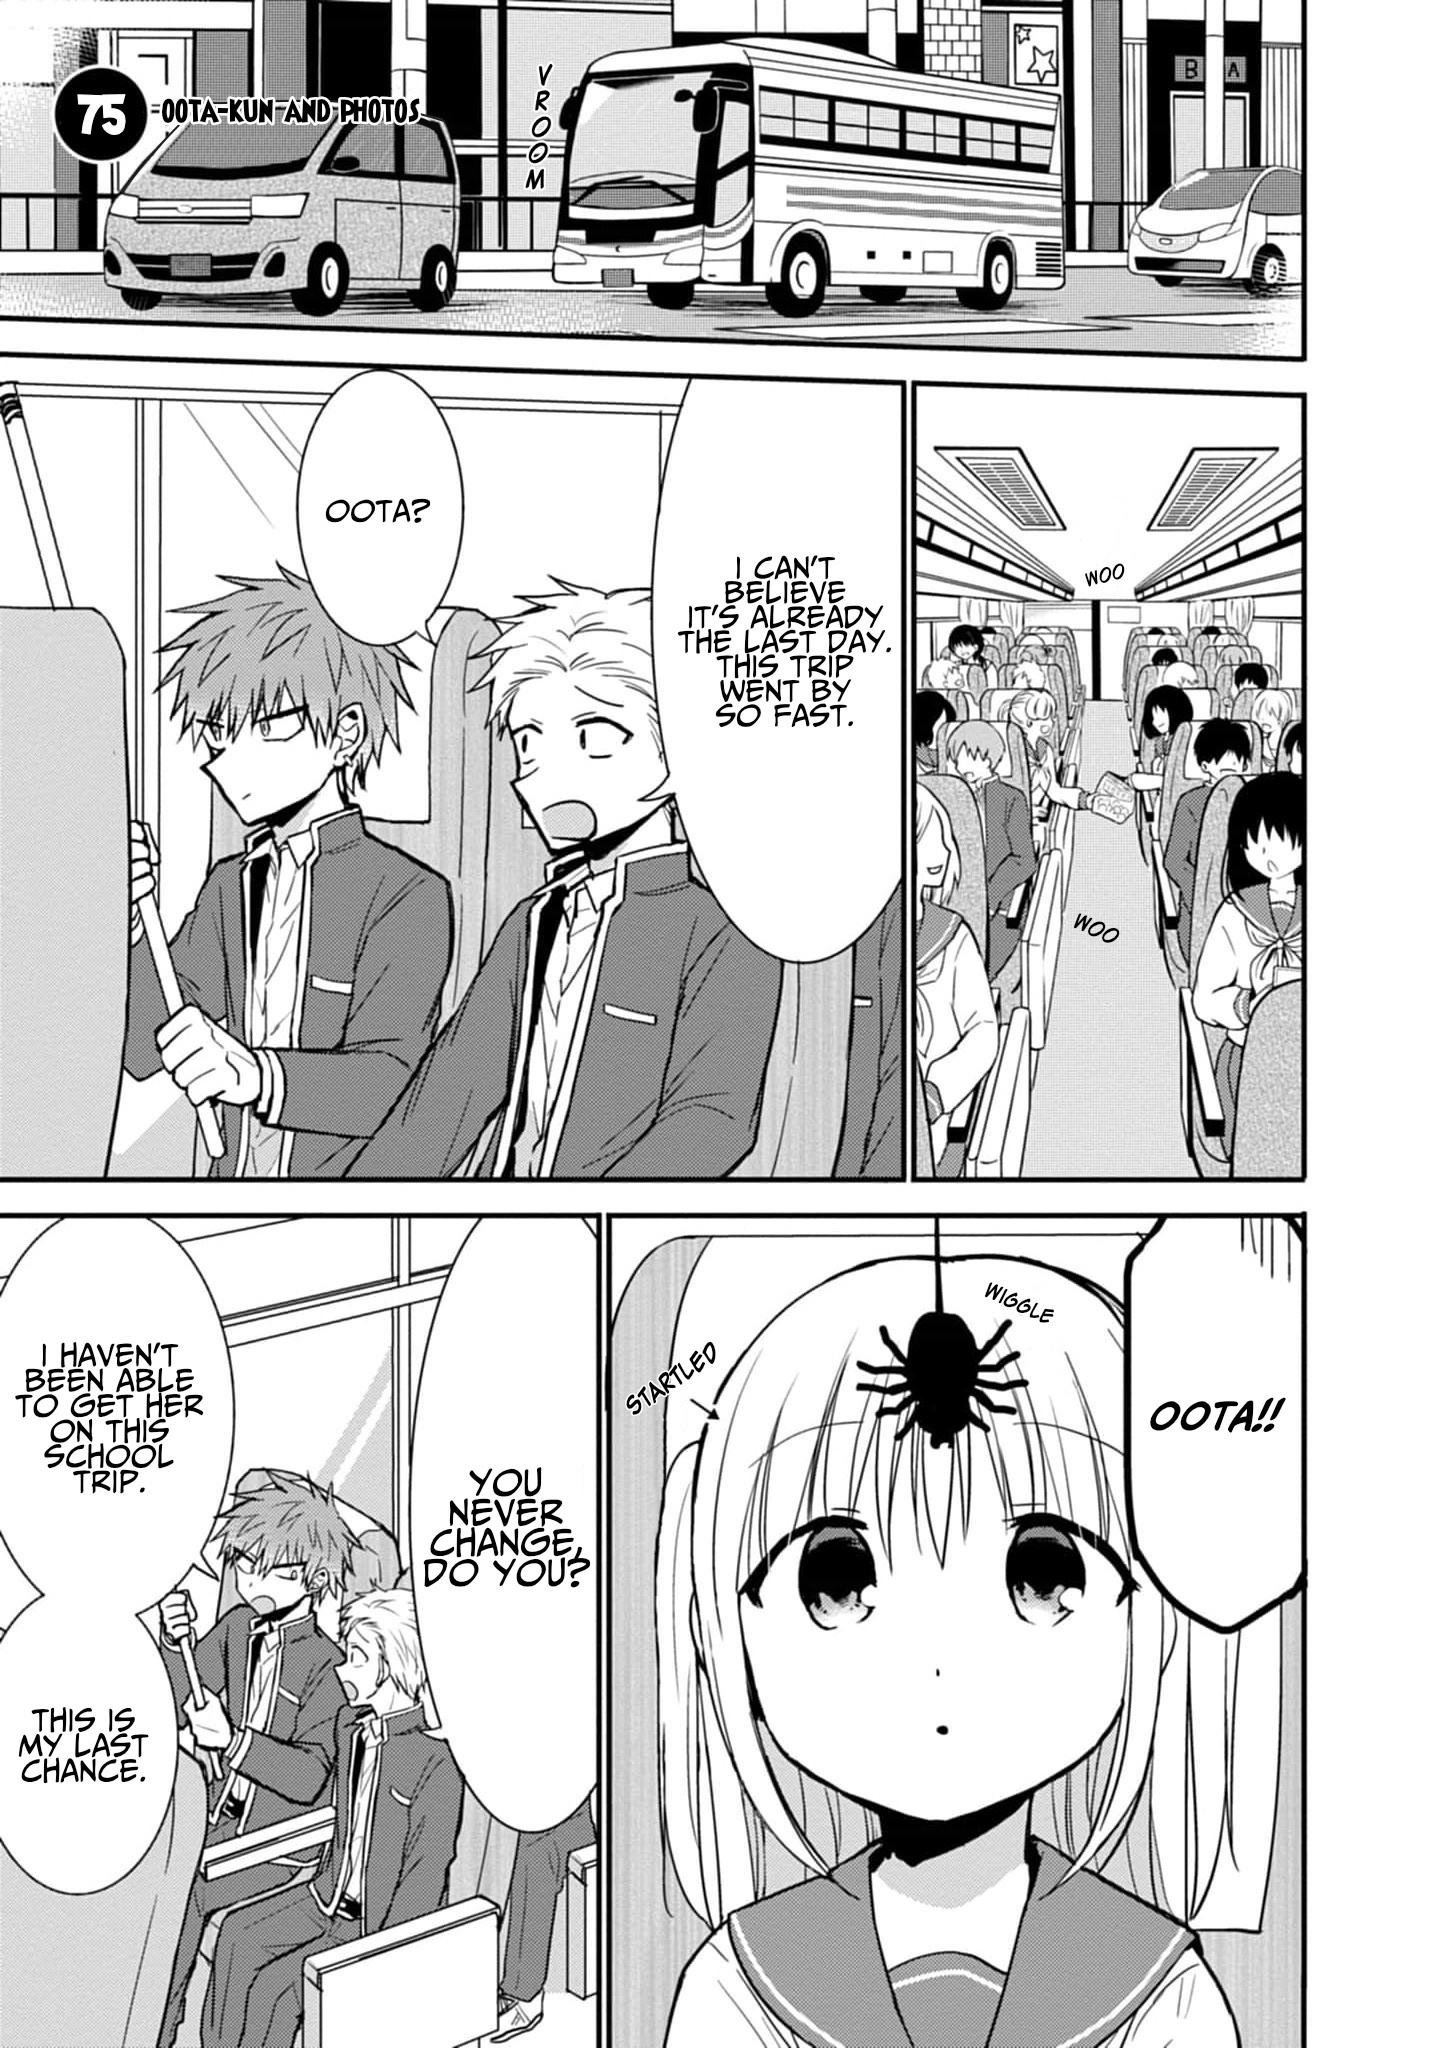 Expressionless Kashiwada-San And Emotional Oota-Kun Vol.6 Chapter 75: Oota-Kun And Photos - Picture 2